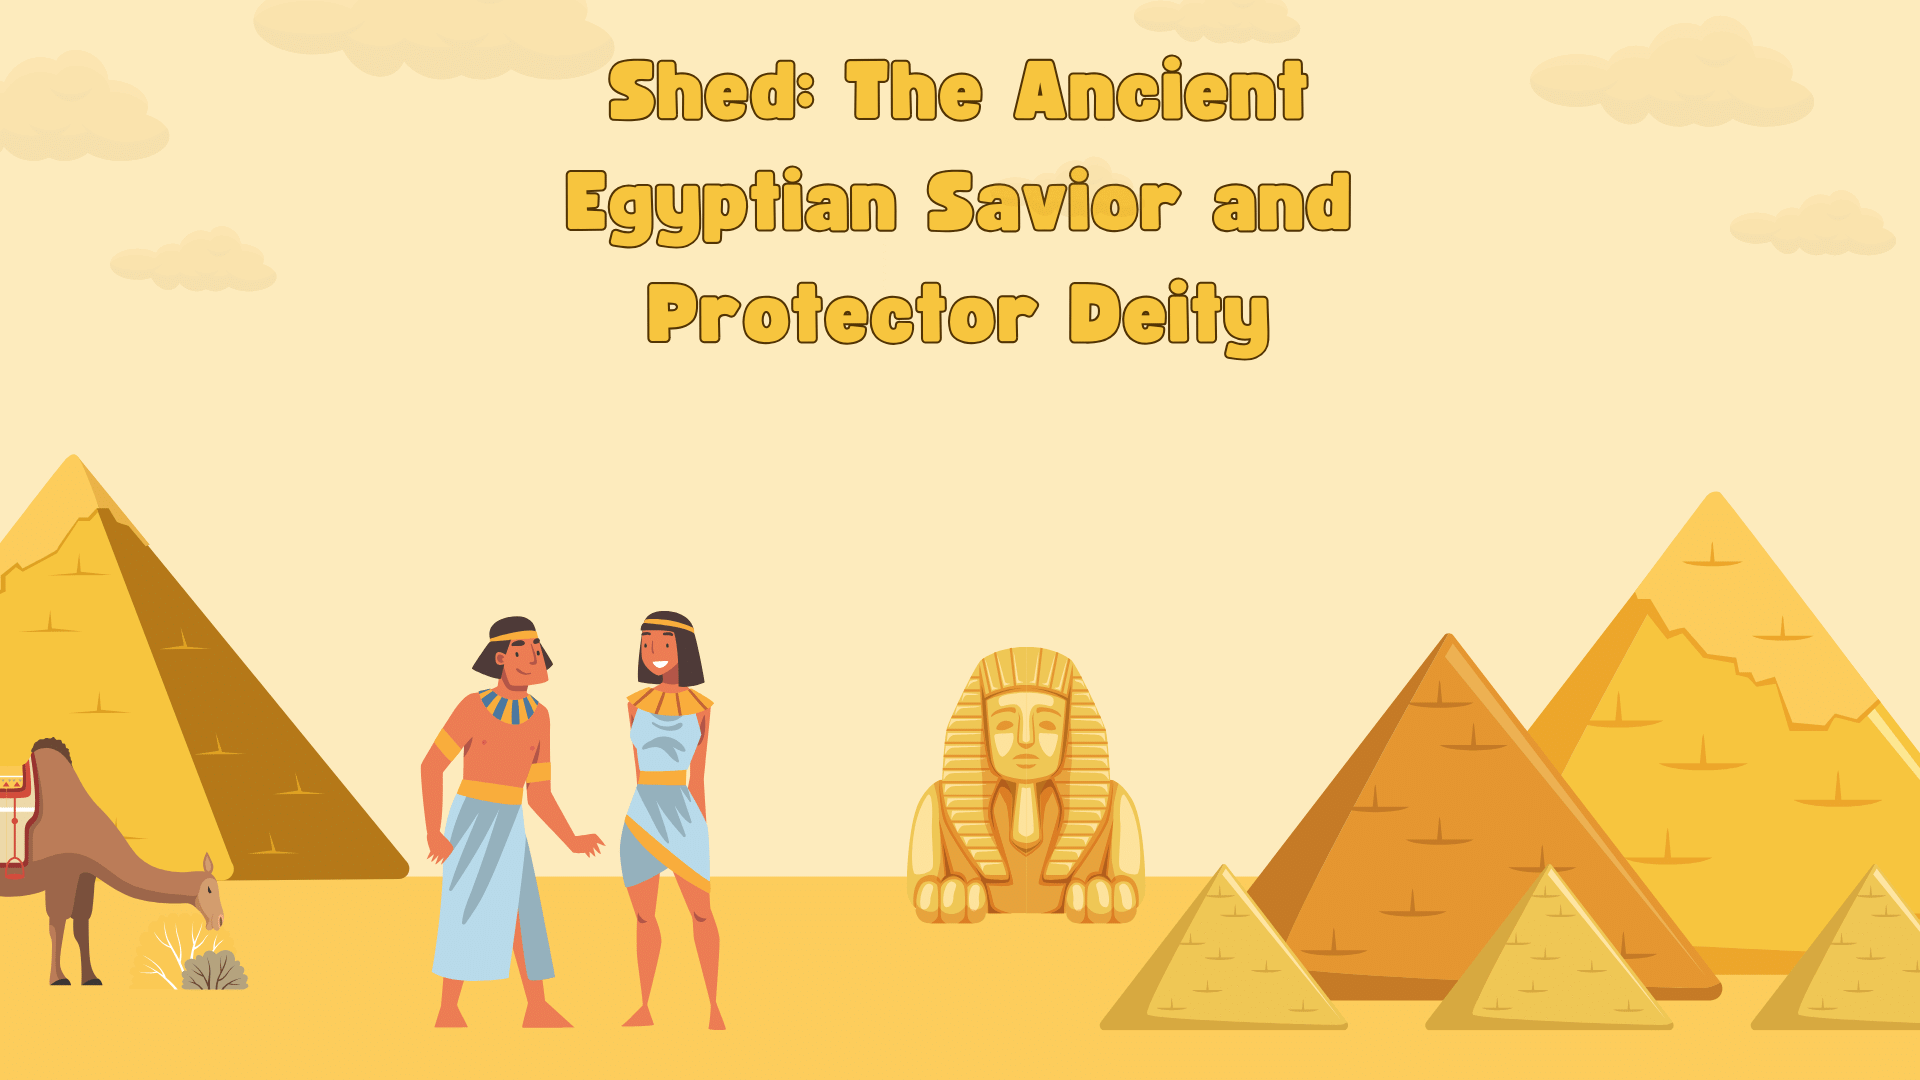 Shed: The Ancient Egyptian Savior and Protector Deity